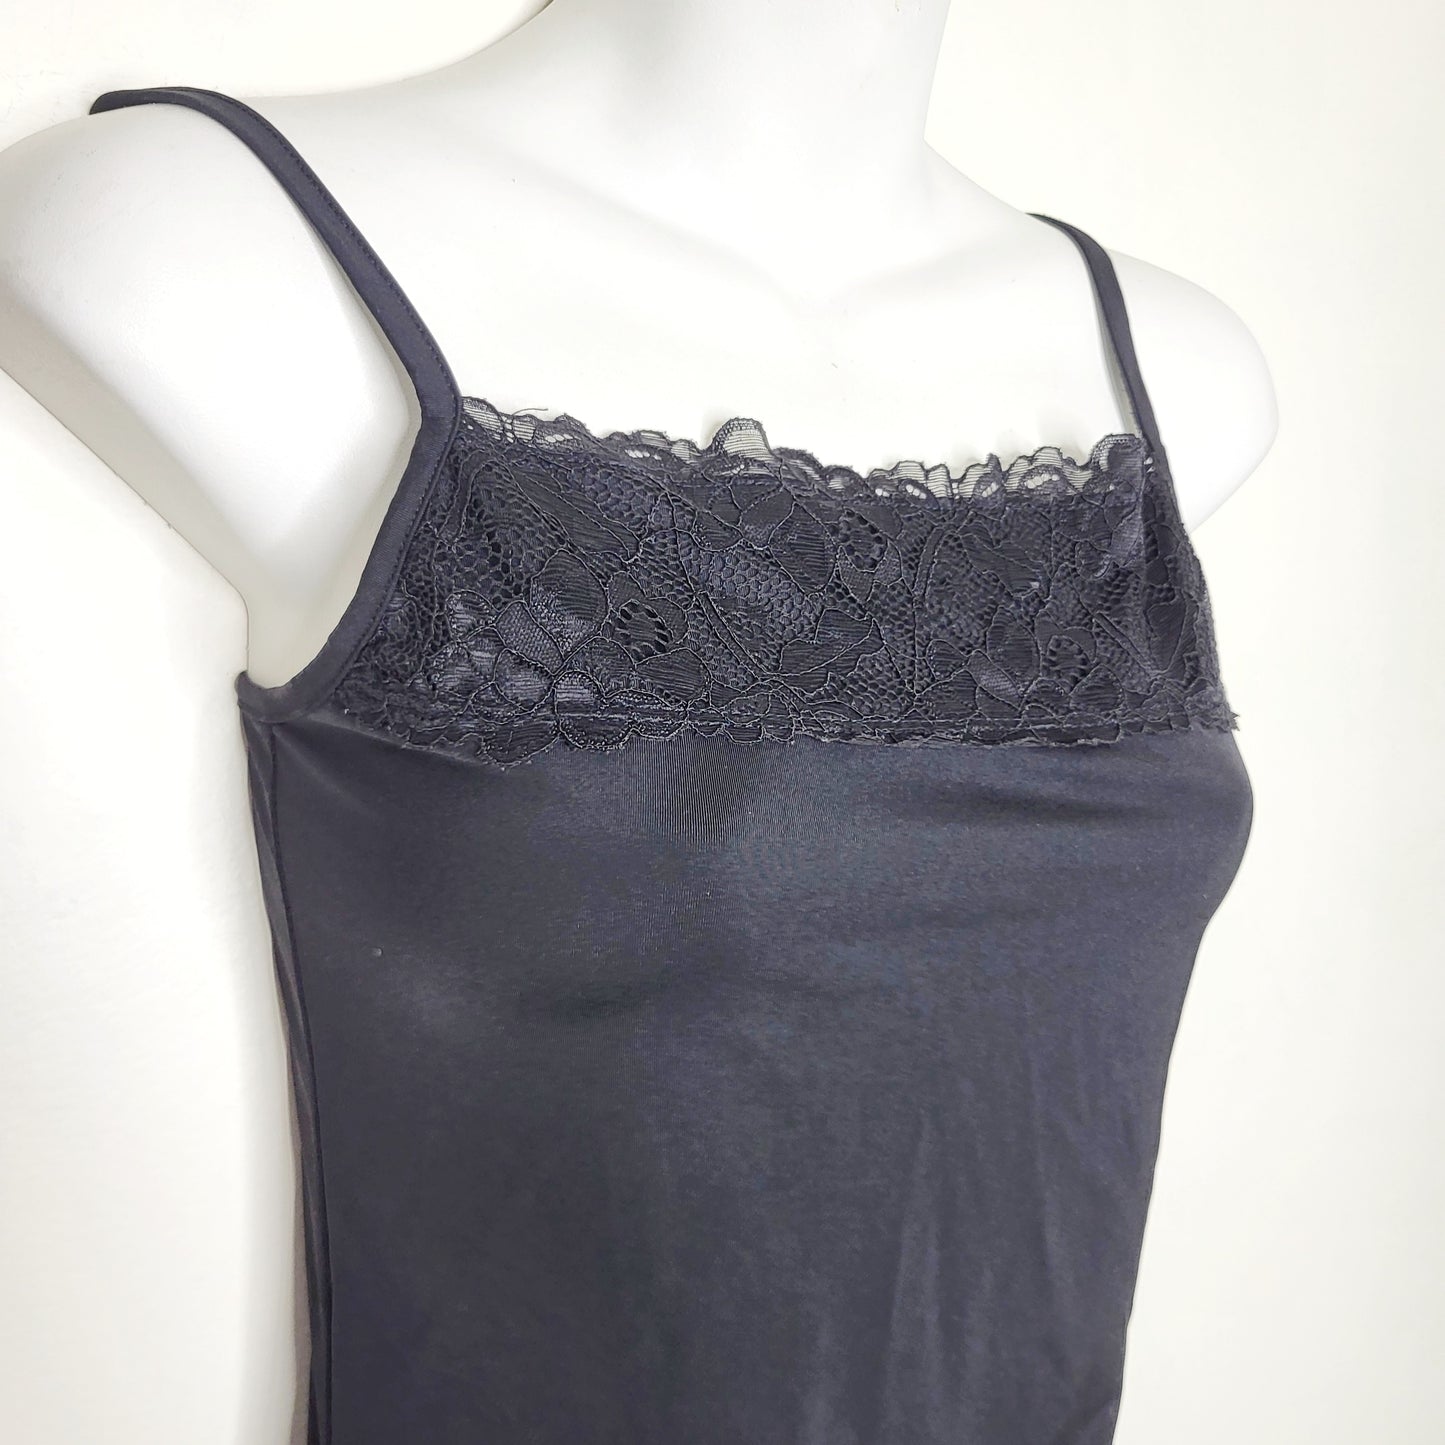 MMNG1 - Maurices black lace cami, size XS